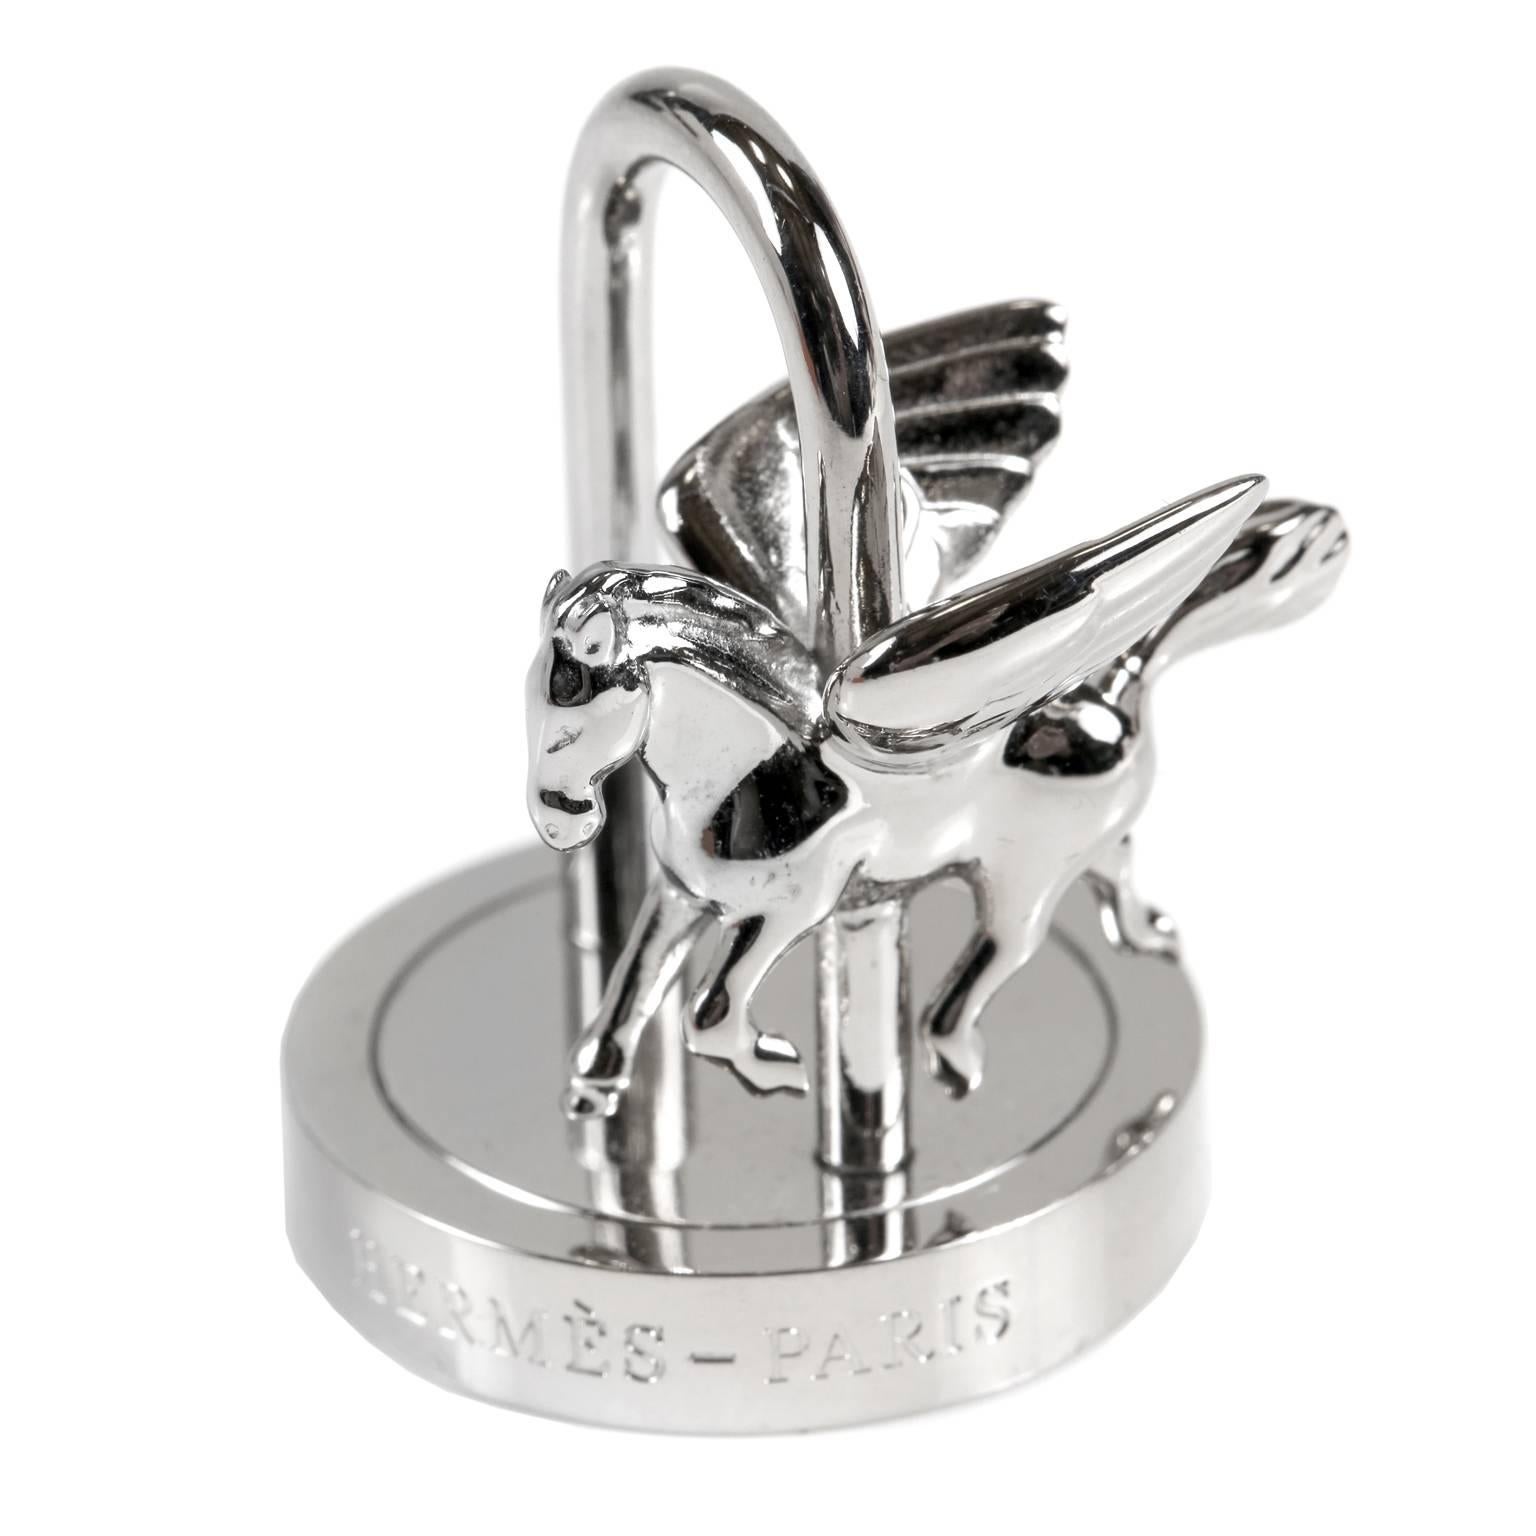 This authentic Hermès Palladium Anee de la Danse Cadena Lock Charm is in mint condition. Palladium Pegasus winged horse on a rotating merry go round base.  Variety of uses include bag charm, necklace pendant or bracelet charm. 
A253